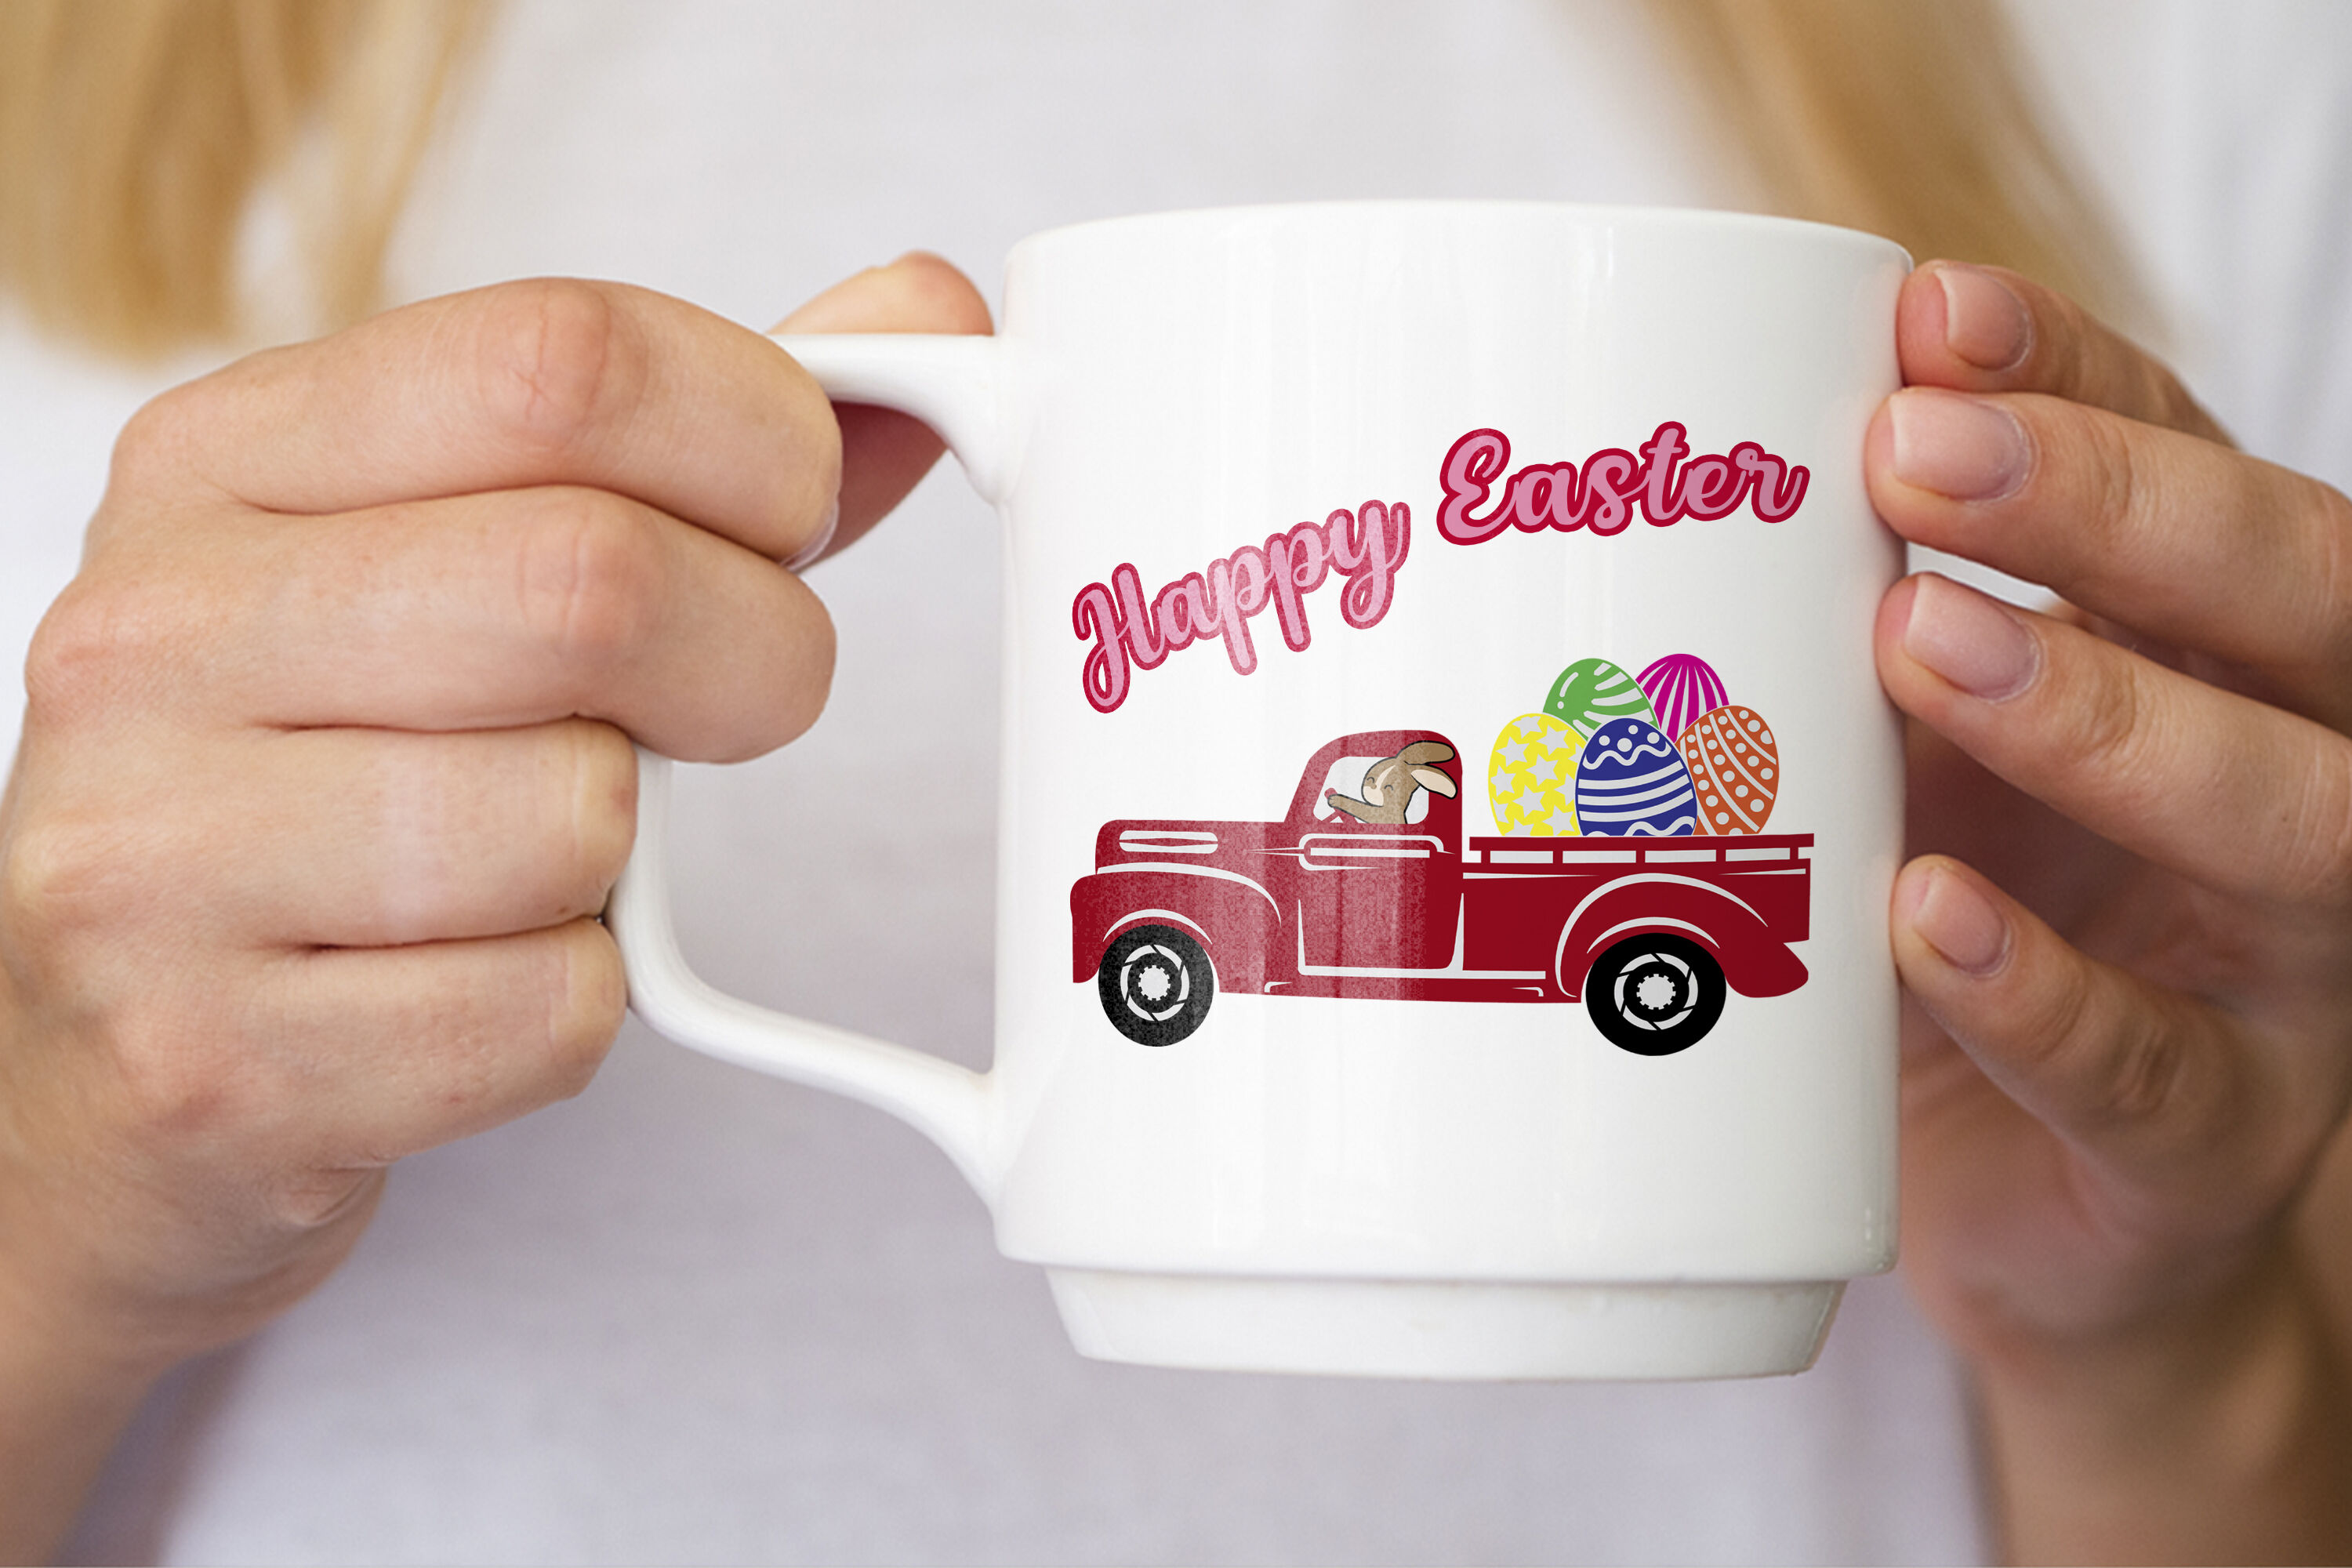 Vintage Red Truck Personalized Christmas Mug